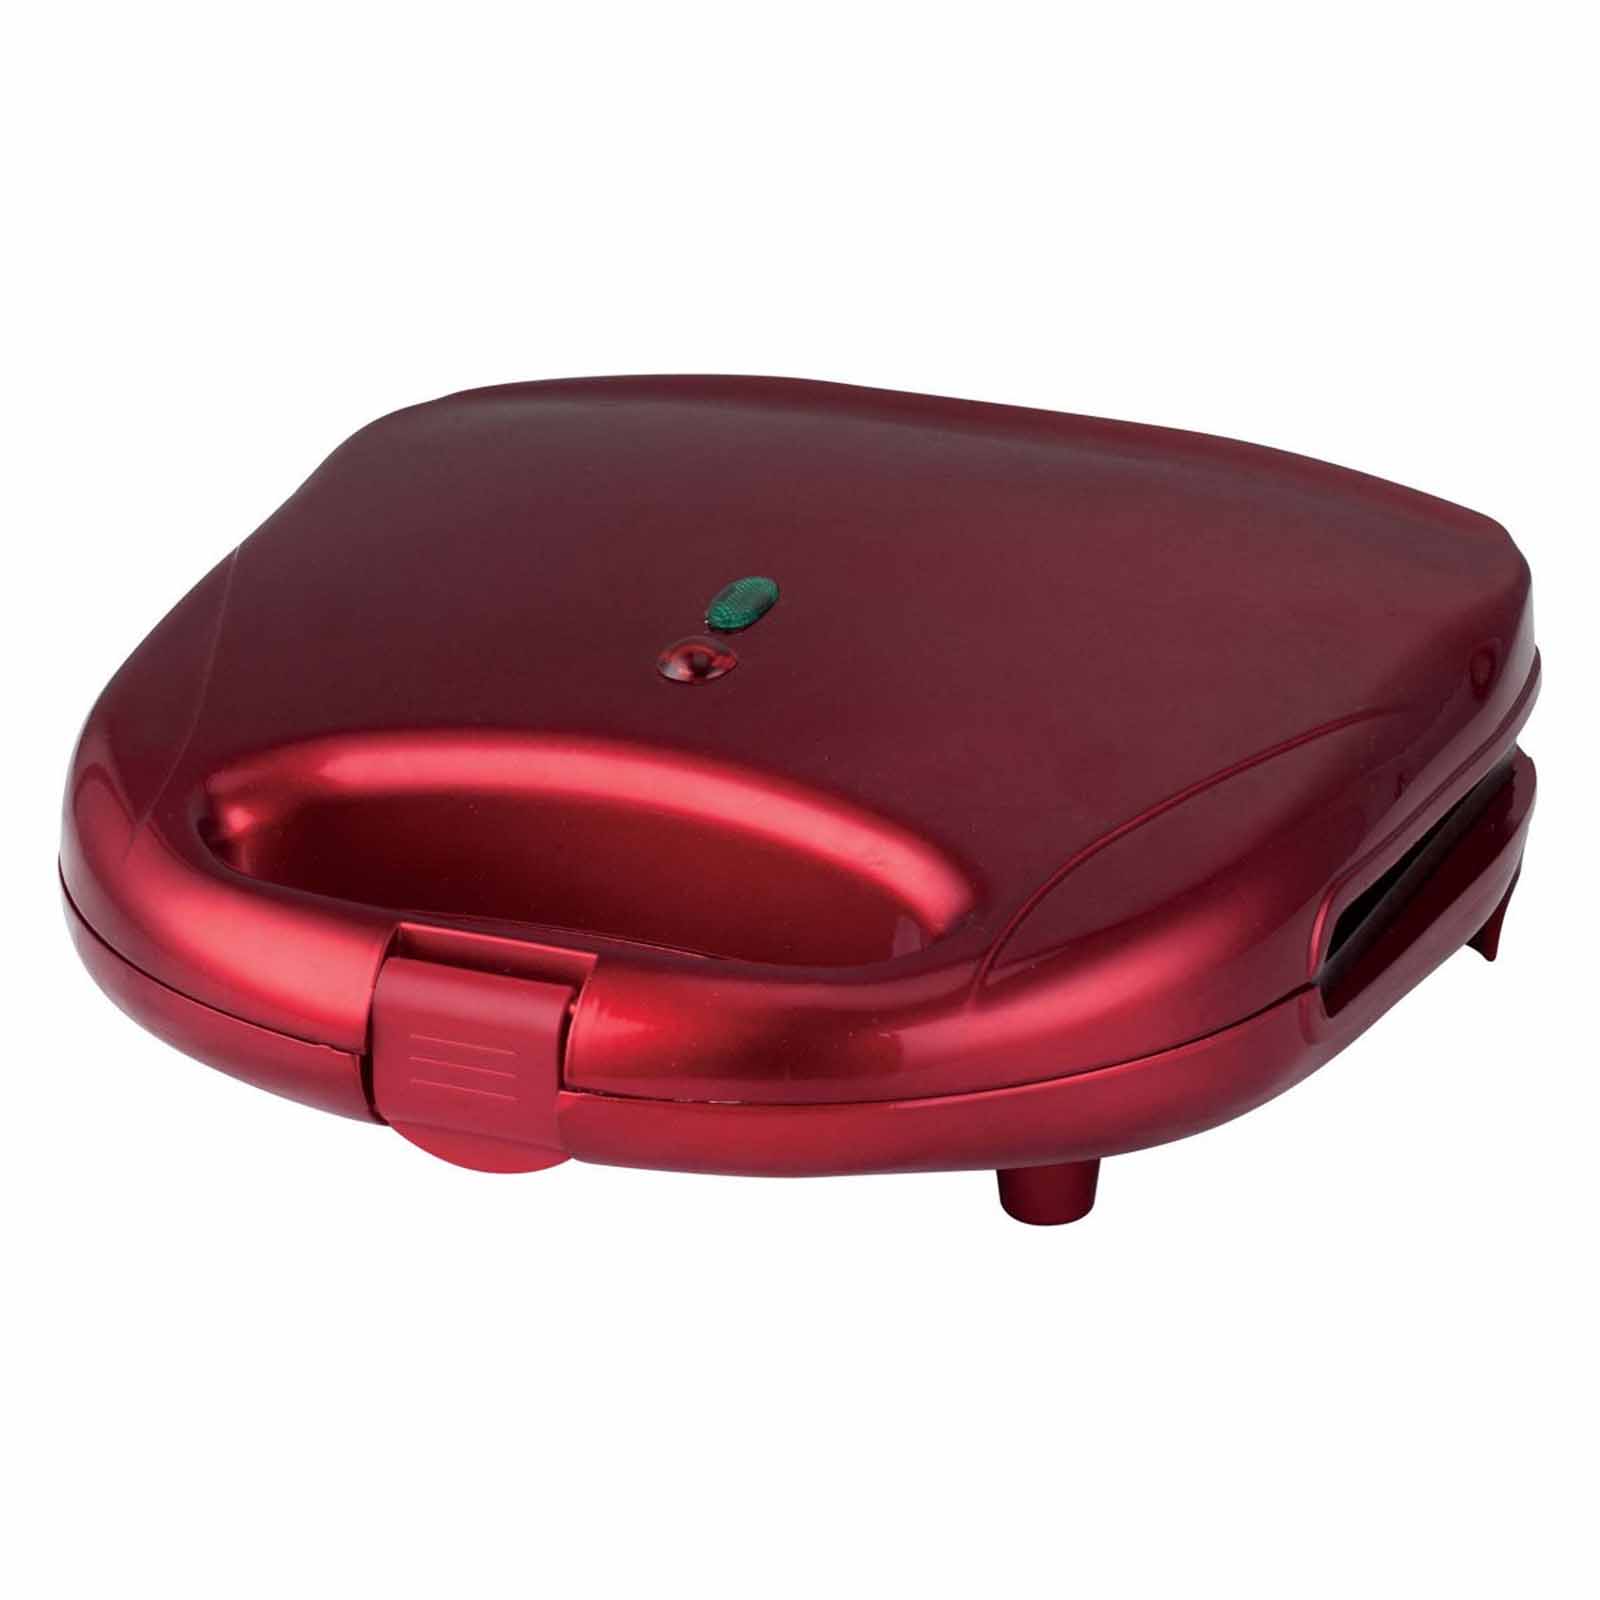 Brentwood Waffle Maker (Red) - 97083211M